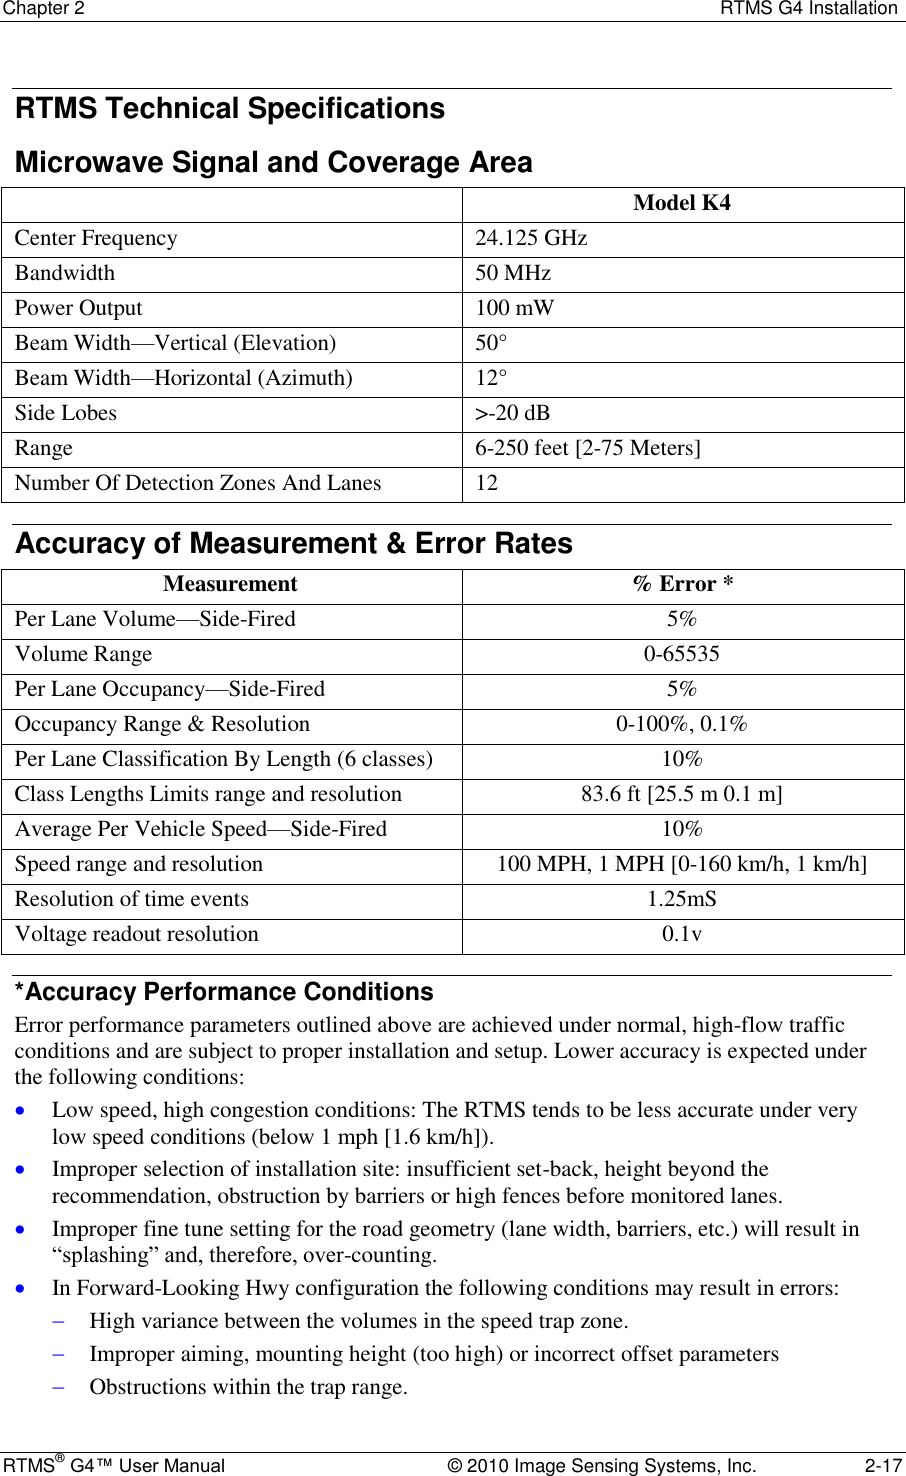 Chapter 2  RTMS G4 Installation RTMS® G4™ User Manual  © 2010 Image Sensing Systems, Inc.  2-17 RTMS Technical Specifications Microwave Signal and Coverage Area  Model K4 Center Frequency 24.125 GHz Bandwidth 50 MHz Power Output 100 mW Beam Width—Vertical (Elevation) 50° Beam Width—Horizontal (Azimuth) 12° Side Lobes &gt;-20 dB Range 6-250 feet [2-75 Meters] Number Of Detection Zones And Lanes 12 Accuracy of Measurement &amp; Error Rates Measurement % Error * Per Lane Volume—Side-Fired 5% Volume Range 0-65535 Per Lane Occupancy—Side-Fired 5% Occupancy Range &amp; Resolution 0-100%, 0.1% Per Lane Classification By Length (6 classes) 10% Class Lengths Limits range and resolution 83.6 ft [25.5 m 0.1 m] Average Per Vehicle Speed—Side-Fired 10% Speed range and resolution 100 MPH, 1 MPH [0-160 km/h, 1 km/h] Resolution of time events 1.25mS Voltage readout resolution 0.1v *Accuracy Performance Conditions Error performance parameters outlined above are achieved under normal, high-flow traffic conditions and are subject to proper installation and setup. Lower accuracy is expected under the following conditions:  Low speed, high congestion conditions: The RTMS tends to be less accurate under very low speed conditions (below 1 mph [1.6 km/h]).  Improper selection of installation site: insufficient set-back, height beyond the recommendation, obstruction by barriers or high fences before monitored lanes.  Improper fine tune setting for the road geometry (lane width, barriers, etc.) will result in ―splashing‖ and, therefore, over-counting.  In Forward-Looking Hwy configuration the following conditions may result in errors:   High variance between the volumes in the speed trap zone.  Improper aiming, mounting height (too high) or incorrect offset parameters  Obstructions within the trap range. 